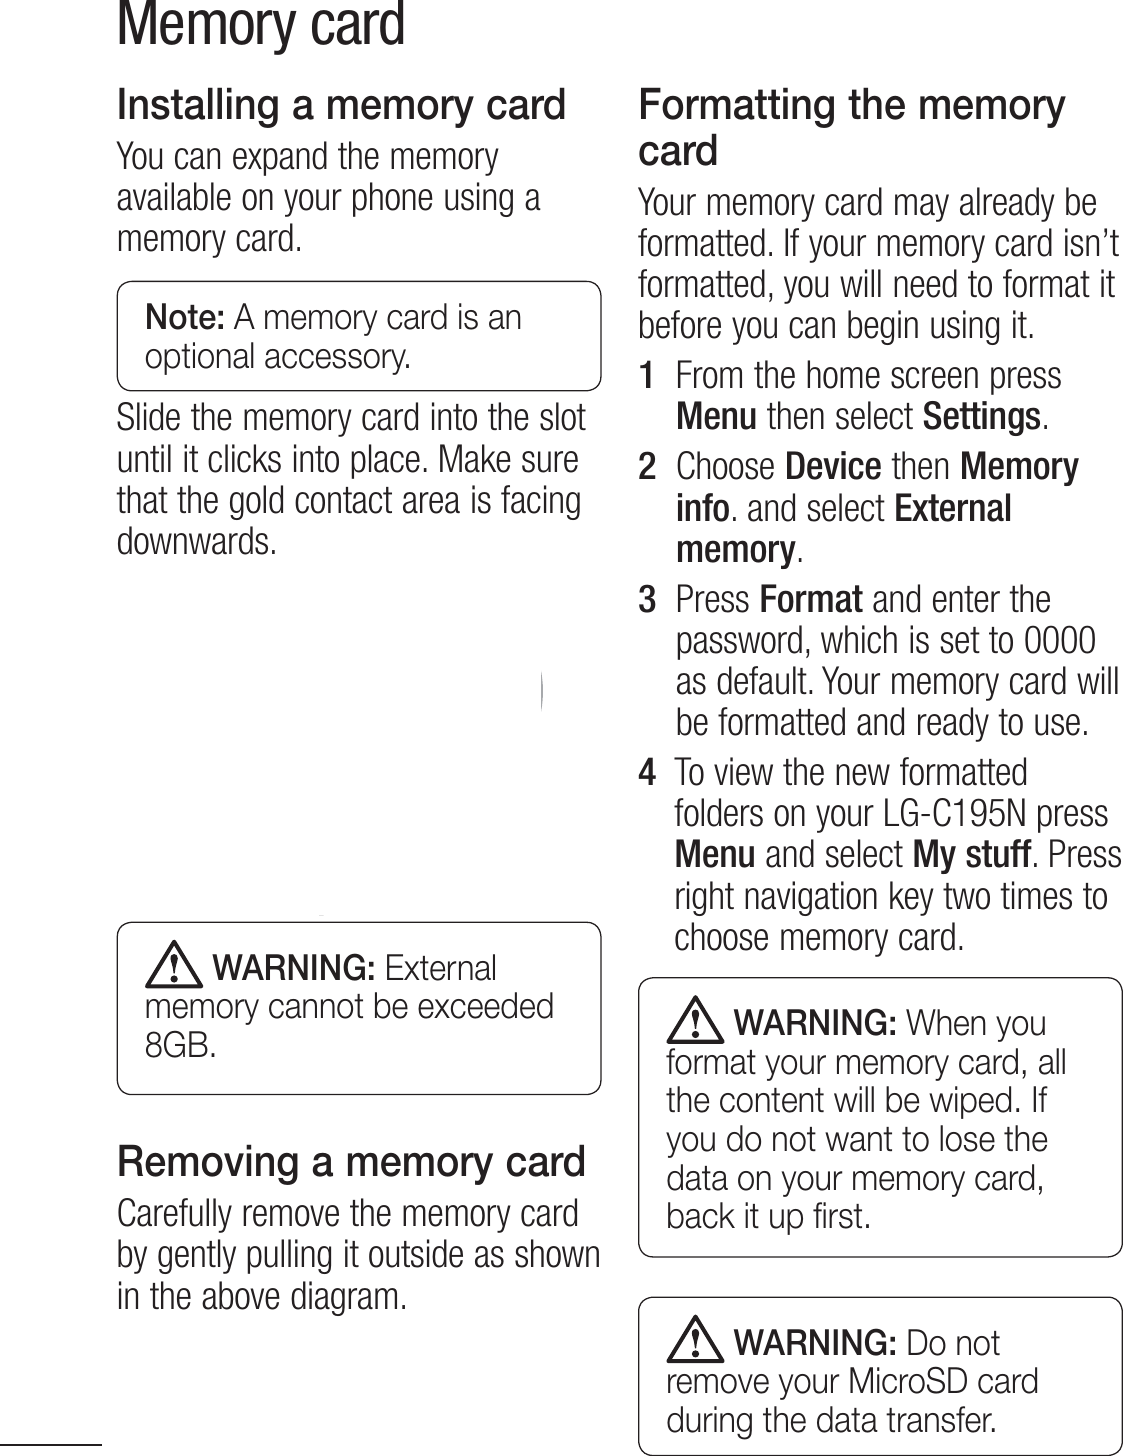 26Memory cardInstalling a memory cardYou can expand the memory available on your phone using a memory card. Note: A memory card is an optional accessory.Slide the memory card into the slot until it clicks into place. Make sure that the gold contact area is facing downwards.   WARNING: External memory cannot be exceeded 8GB.Removing a memory cardCarefully remove the memory card by gently pulling it outside as shown  in the above diagram.Formatting the memory cardYour memory card may already be formatted. If your memory card isn’t formatted, you will need to format it before you can begin using it.1   From the home screen press Menu then select Settings.2   Choose Device then Memory info. and select External memory. 3   Press Format and enter the password, which is set to 0000 as default. Your memory card will be formatted and ready to use.4    To view the new formatted folders on your LG-C195N press Menu and select My stuff. Press right navigation key two times to  choose memory card.  WARNING: When you format your memory card, all the content will be wiped. If you do not want to lose the data on your memory card, back it up ﬁrst.  WARNING: Do not remove your MicroSD card during the data transfer. 